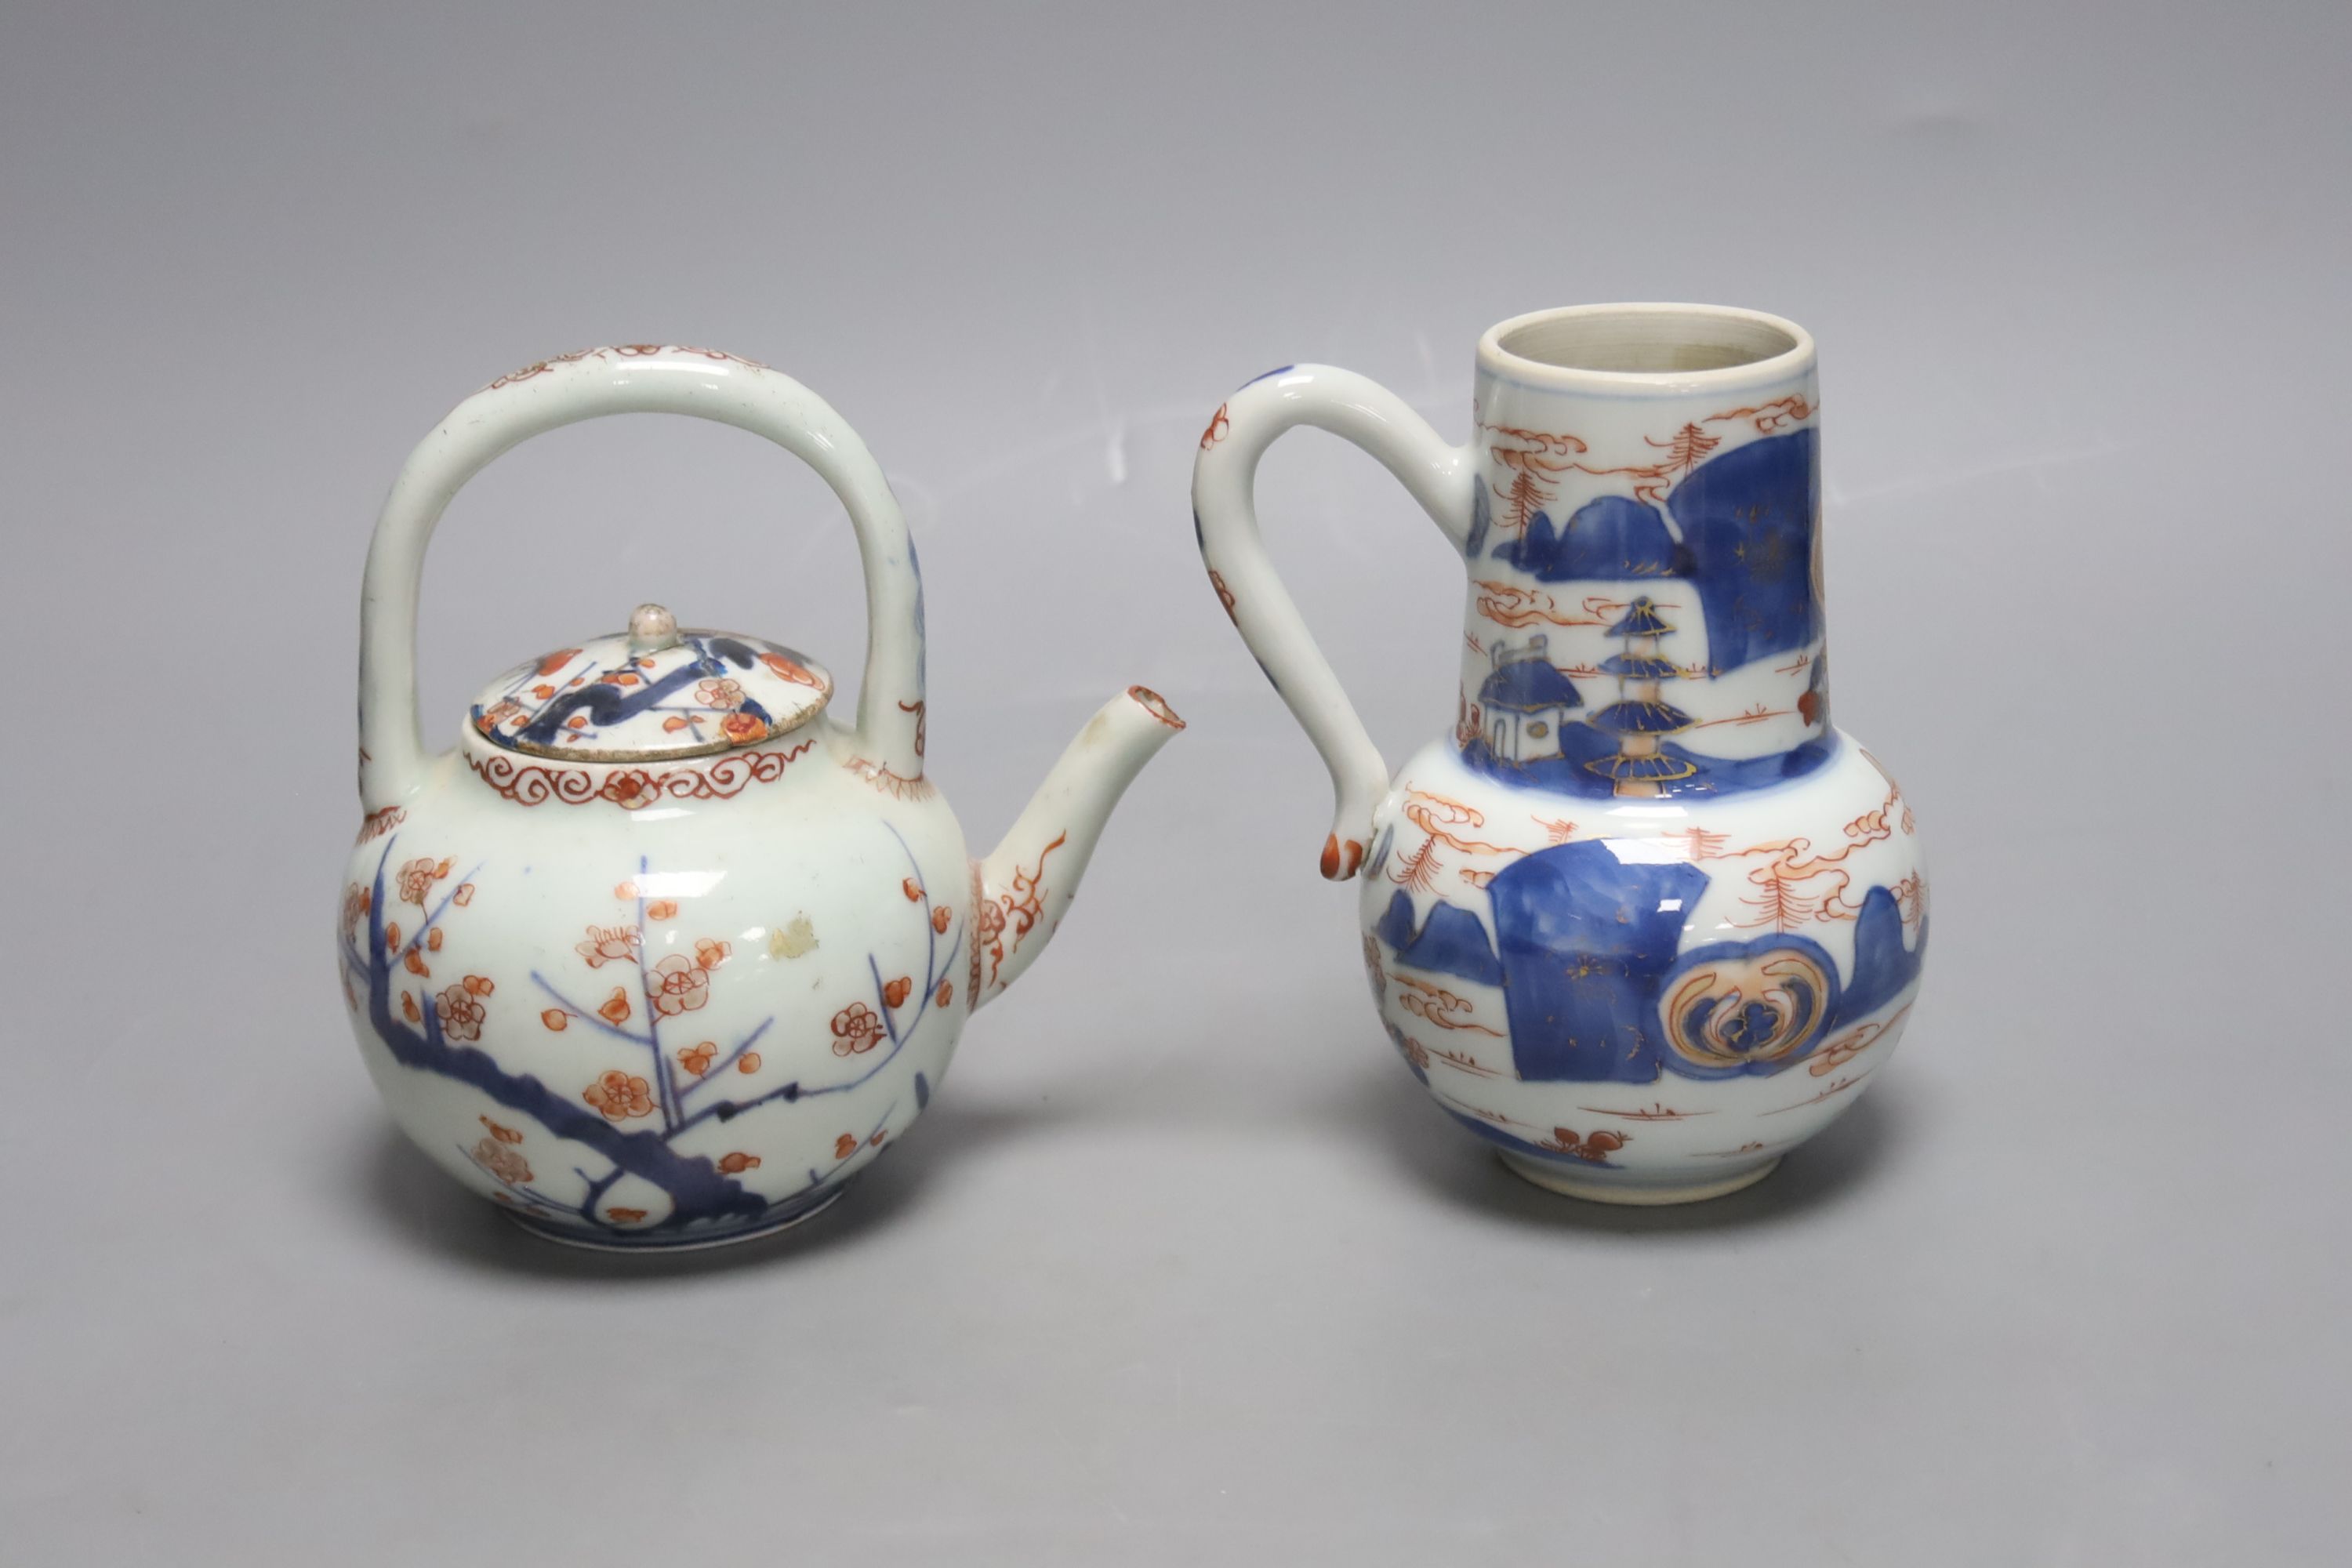 A pair of 18th century Chinese Imari style dishes, diameter 22.5cm, together with a similar chocolate pot and an 18th century Japanese Arita teapot, associated cover